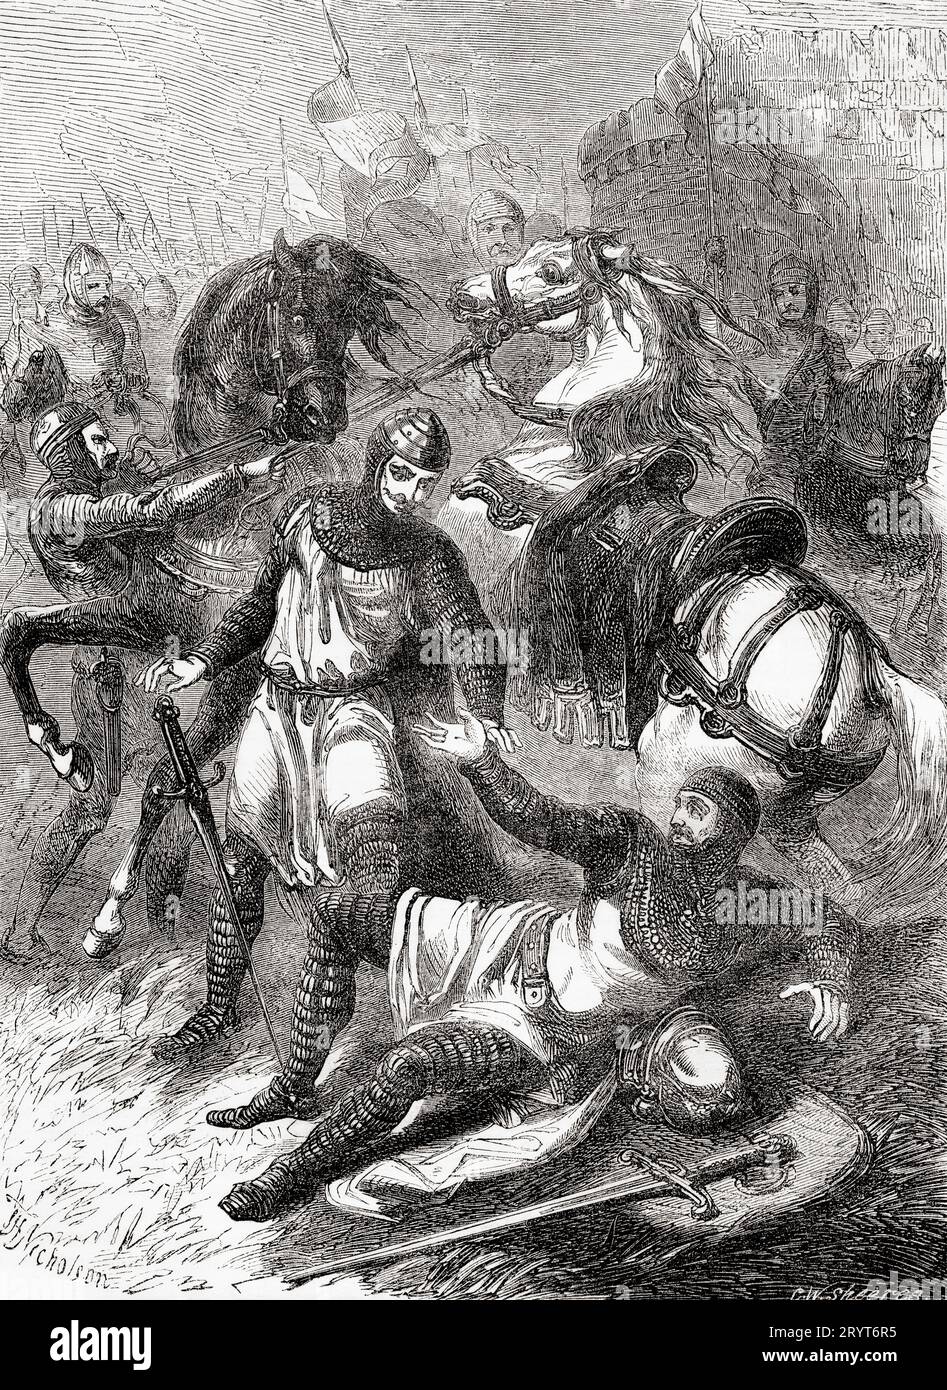 Robert Curthose the son of William the conqueror asking for forgiveness for unseating and wounding his Father William I in battle, 1079. William I, c. 1028 - 1087, aka William the Conqueror and William the Bastard.  First Norman king of England. From Cassell's Illustrated History of England, published 1857. Stock Photo